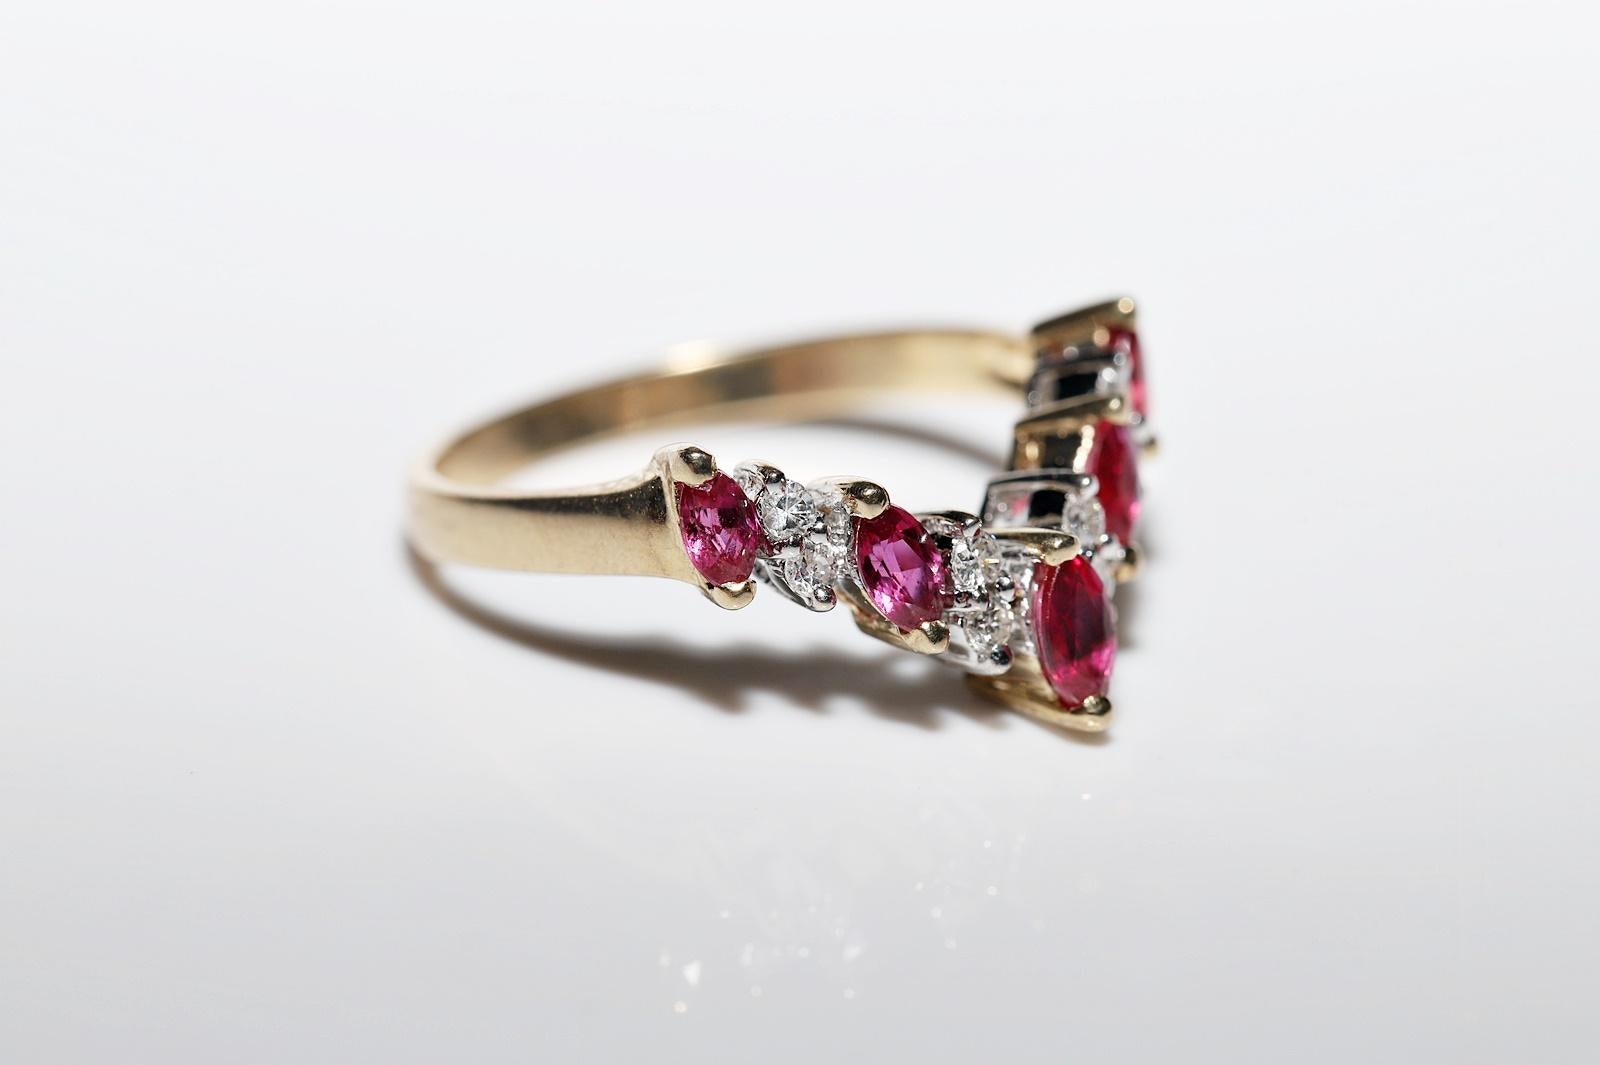  Vintage Circa 1990s 14k Gold Natural Diamond And Ruby Decorated Ring  For Sale 1